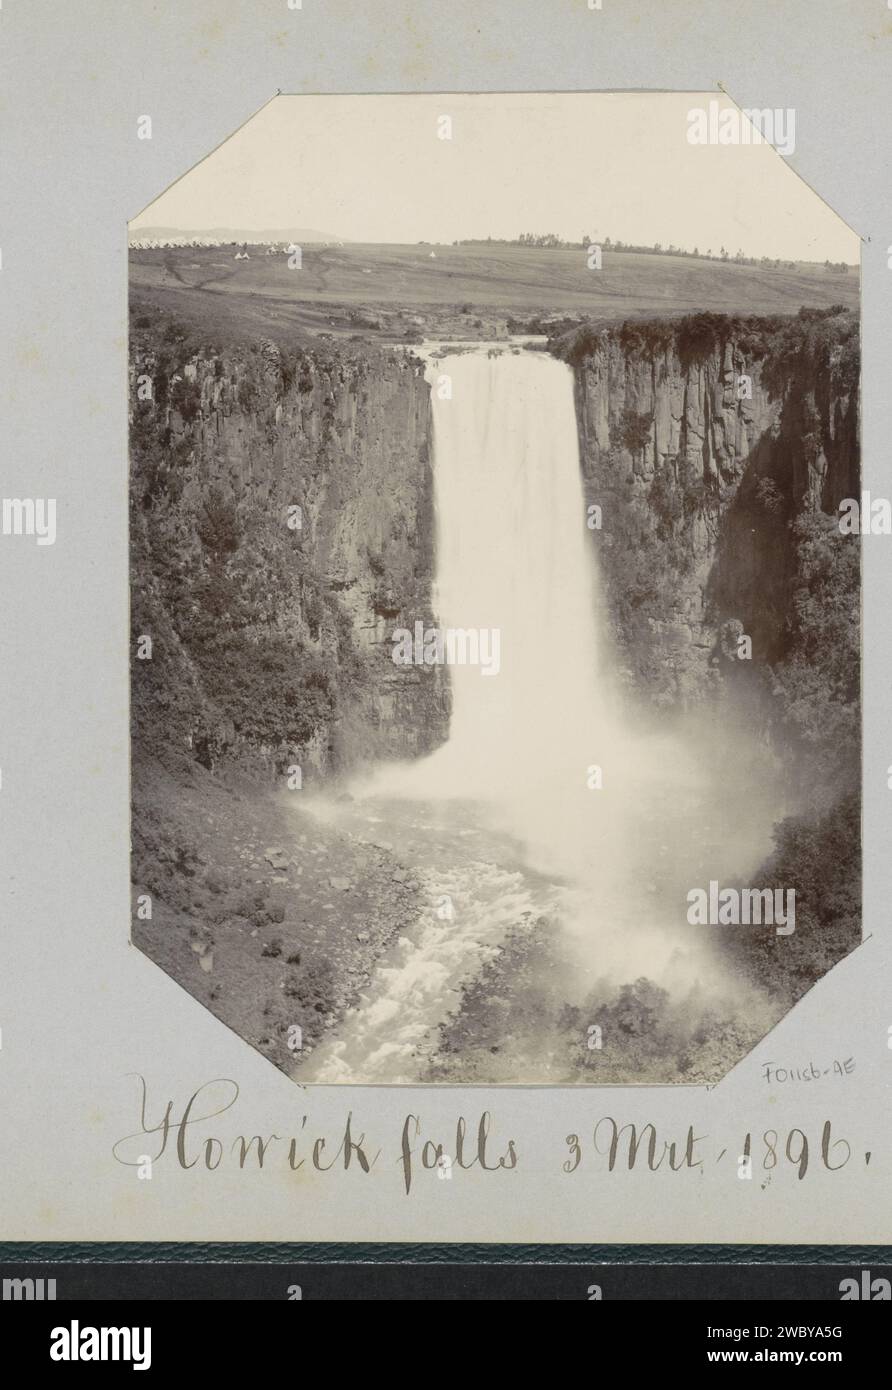 View of Howick Falls in Howick, South Africa, Anonymous, 1896 photograph This photo is part of an album. Howick photographic support  waterfall Howick Falls Stock Photo